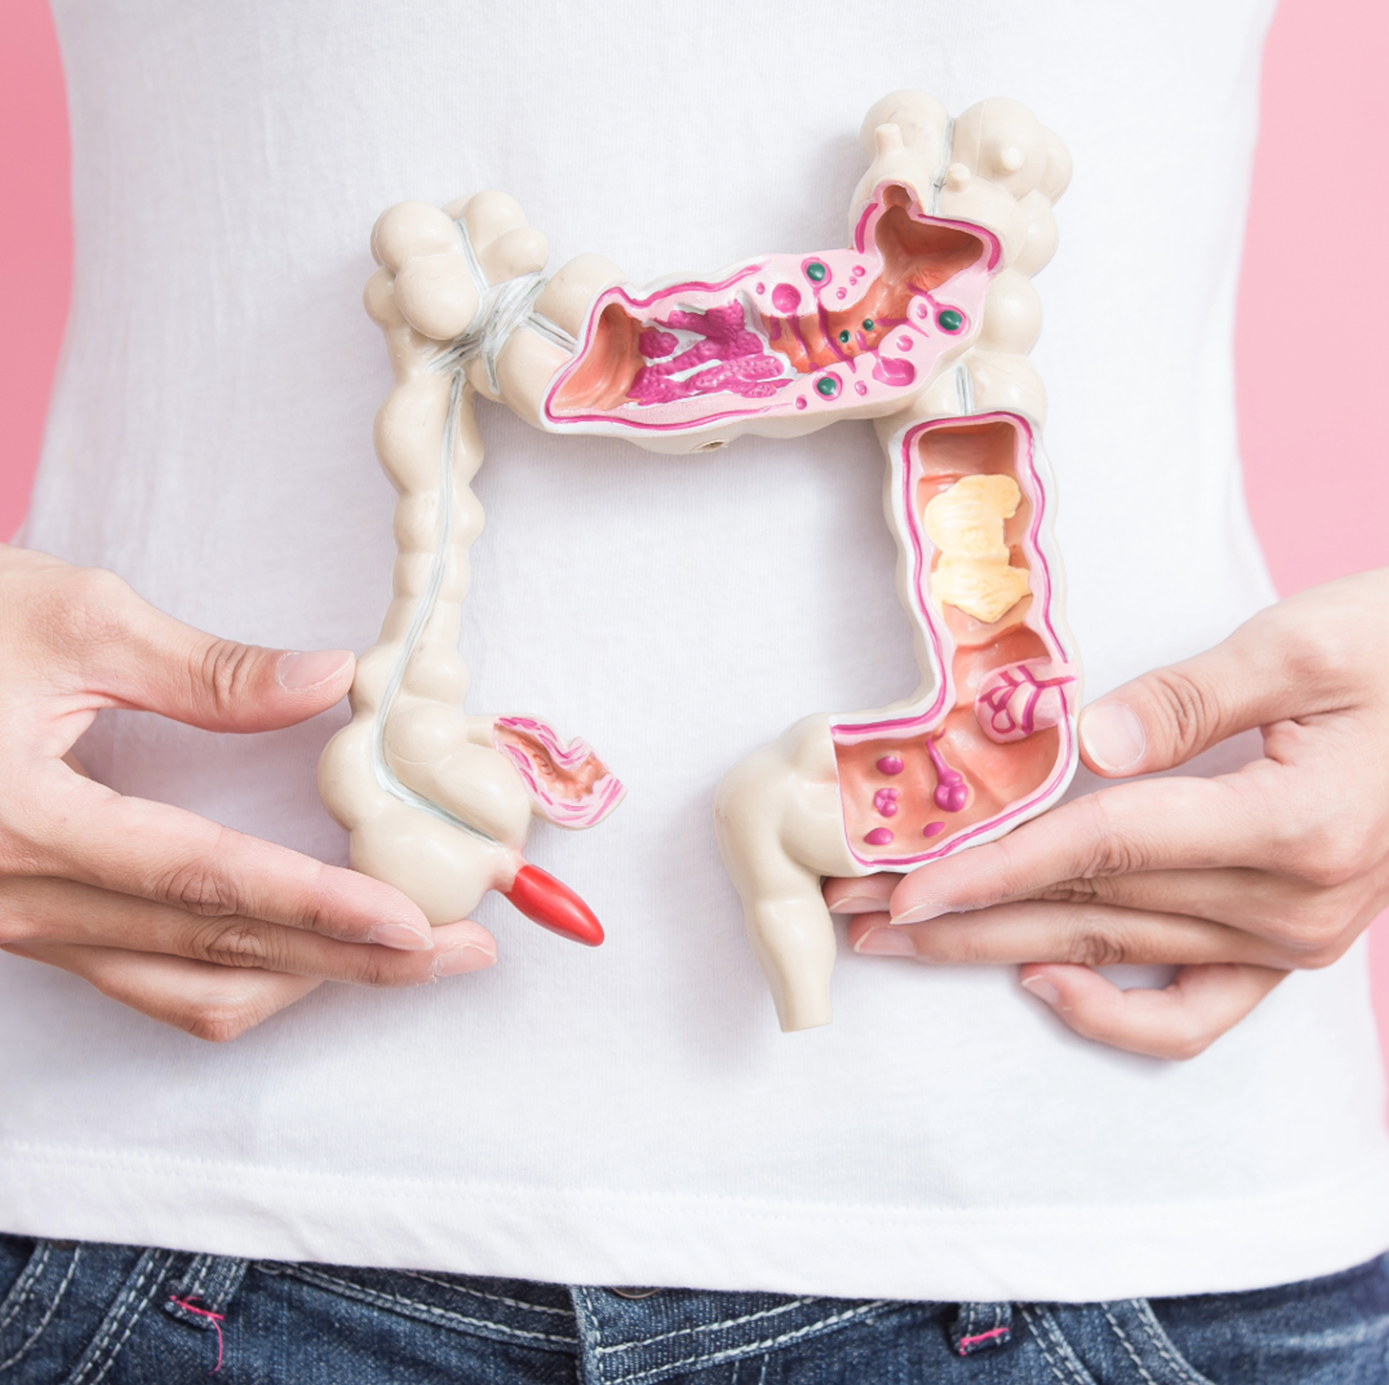 3 ways to Improve your Gut Health Naturally